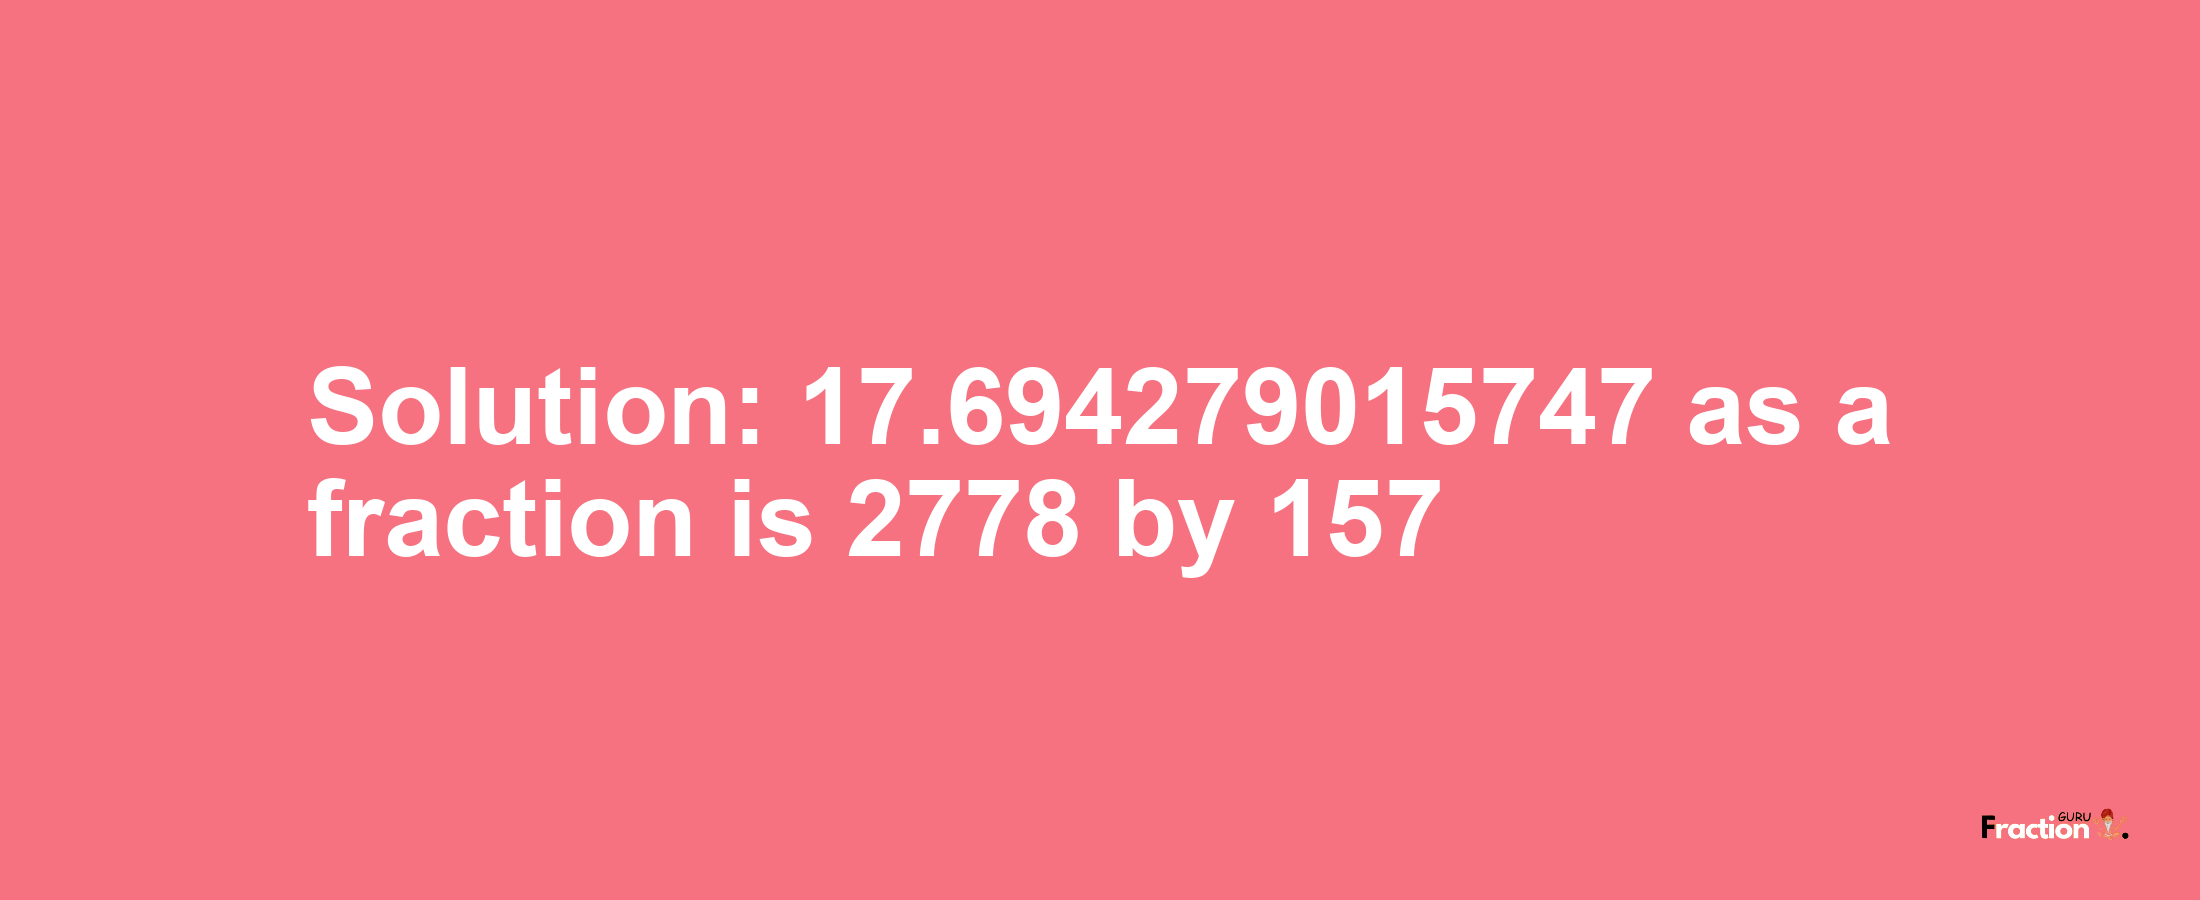 Solution:17.694279015747 as a fraction is 2778/157